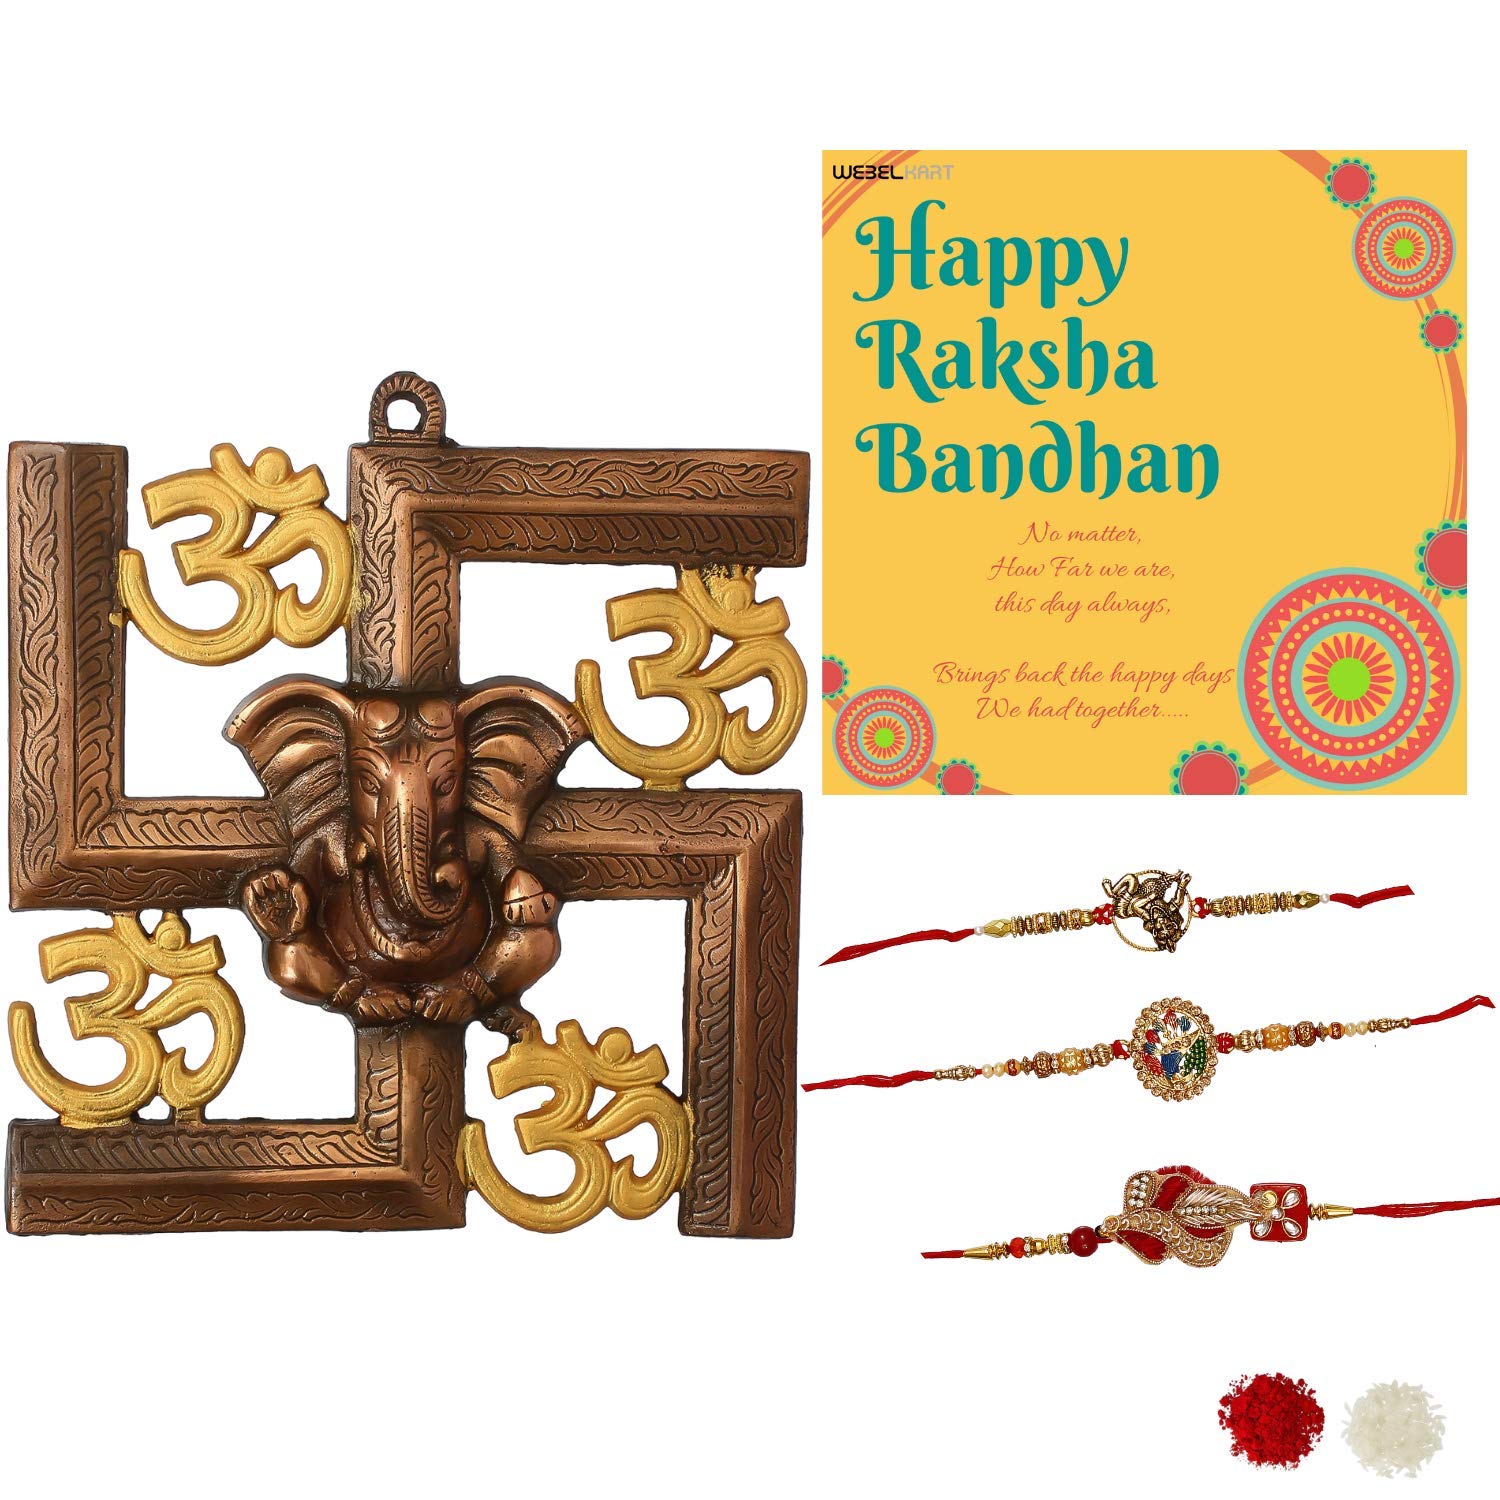 Kids Light Rakhi with Candies and Key Chain in Heart Shaped Basket: Gift/Send  Rakhi Gifts Online J11070636 |IGP.com